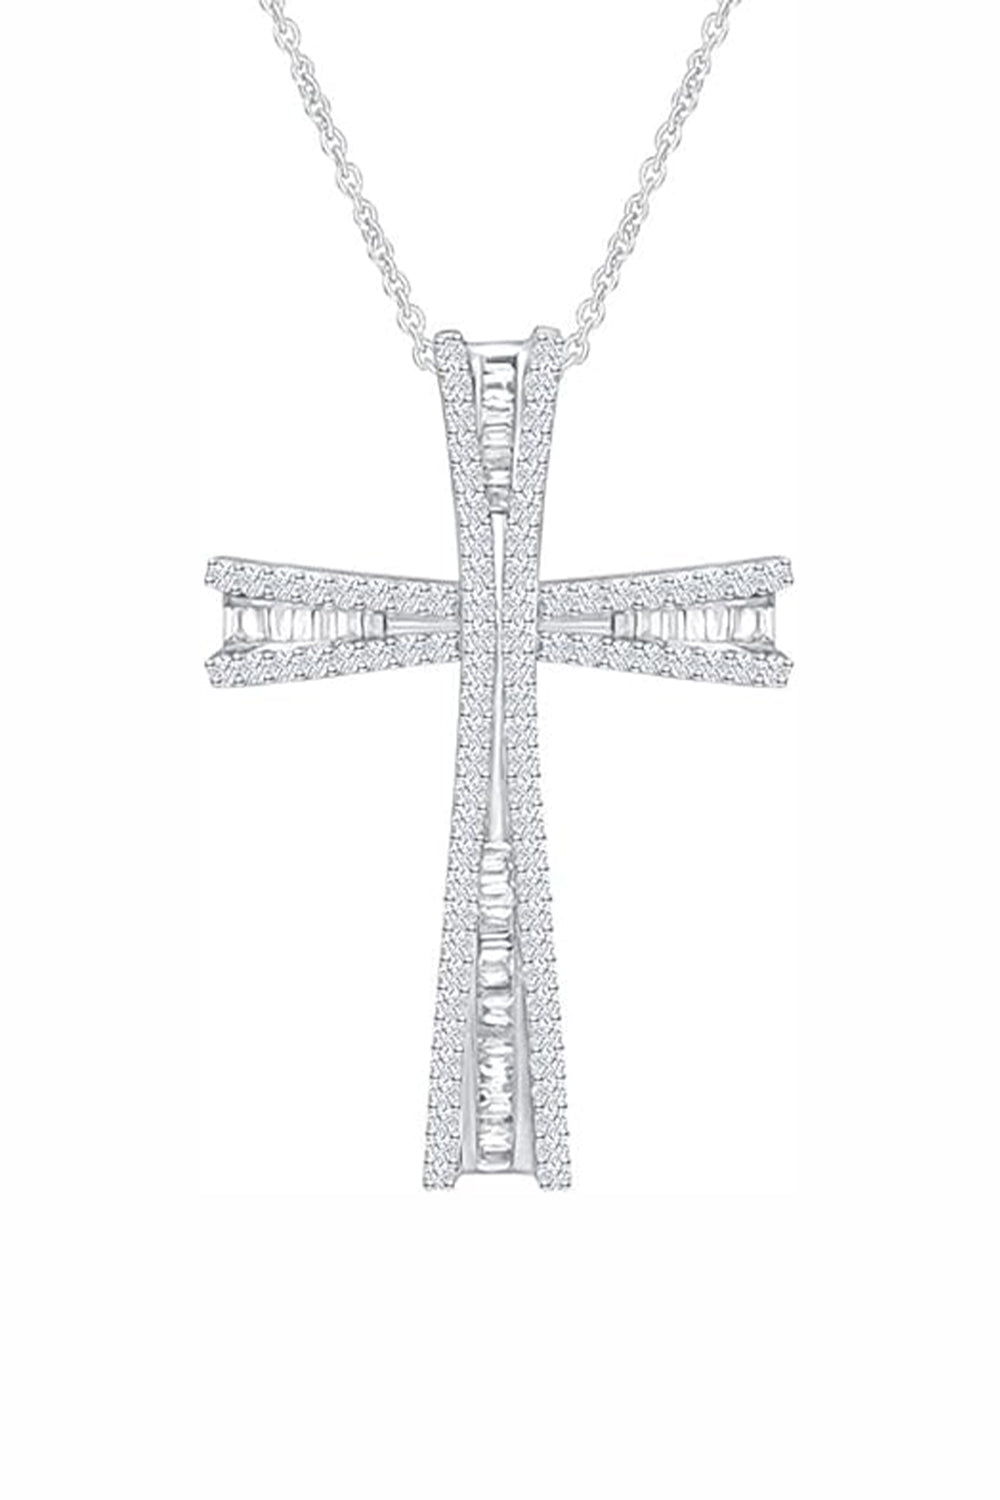 White Gold Color Flared Cross Pendant Necklace, Cross Necklace Religious